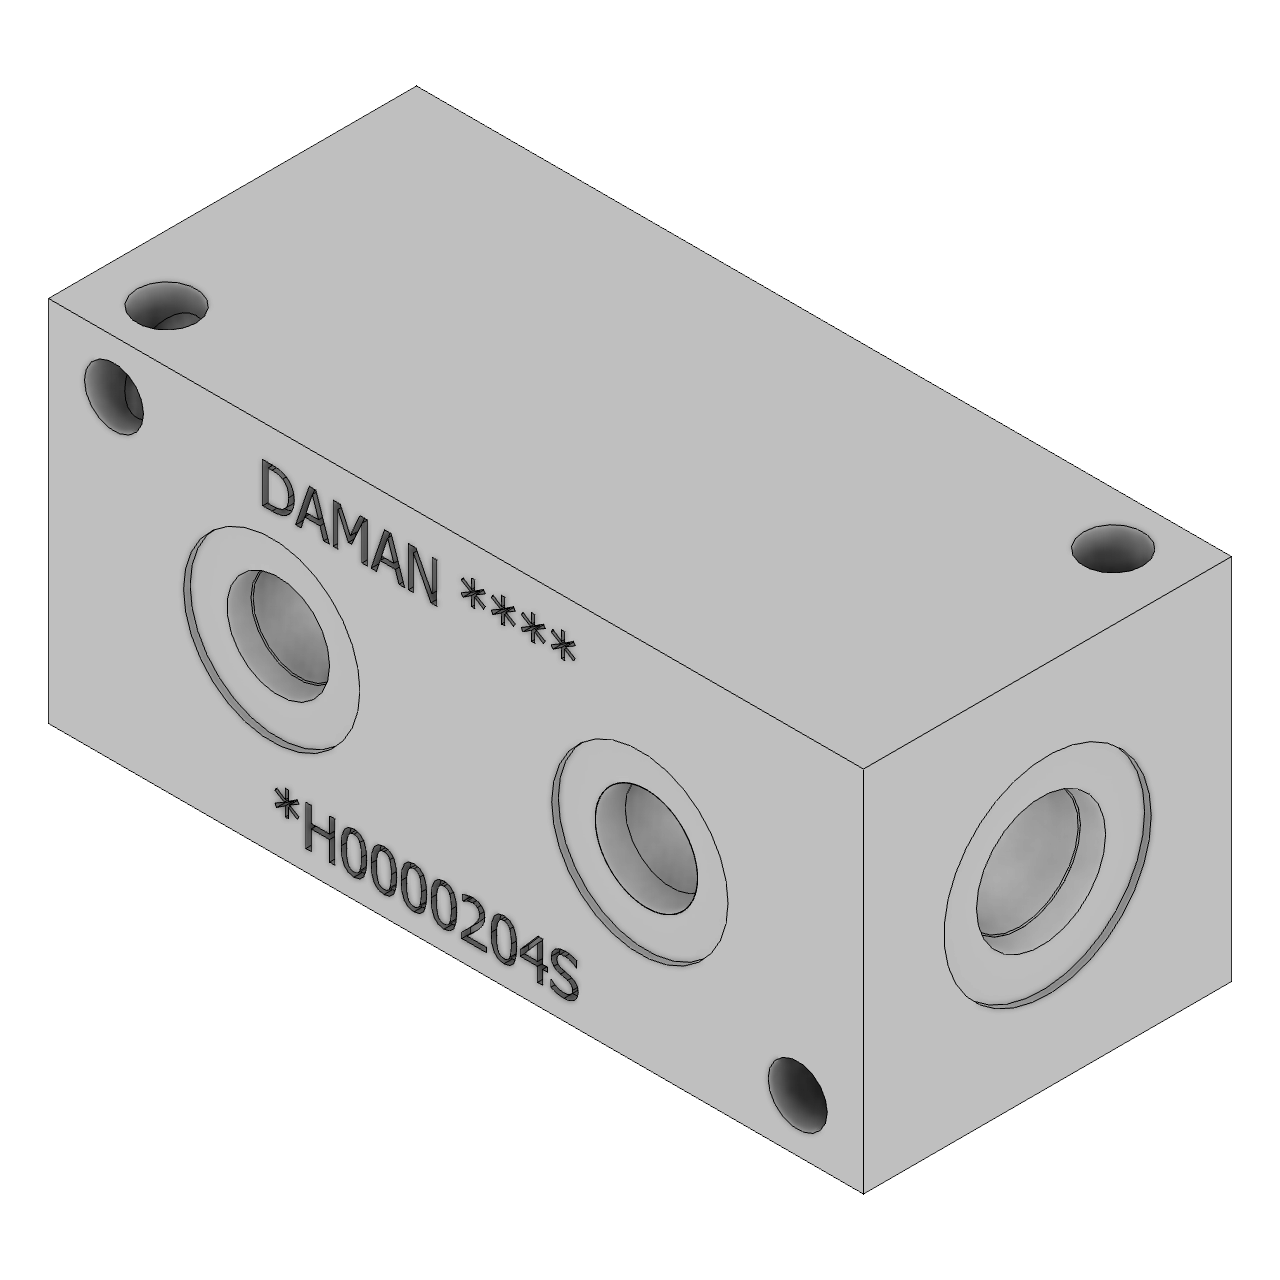 DH0000204S - Header and Junction Blocks